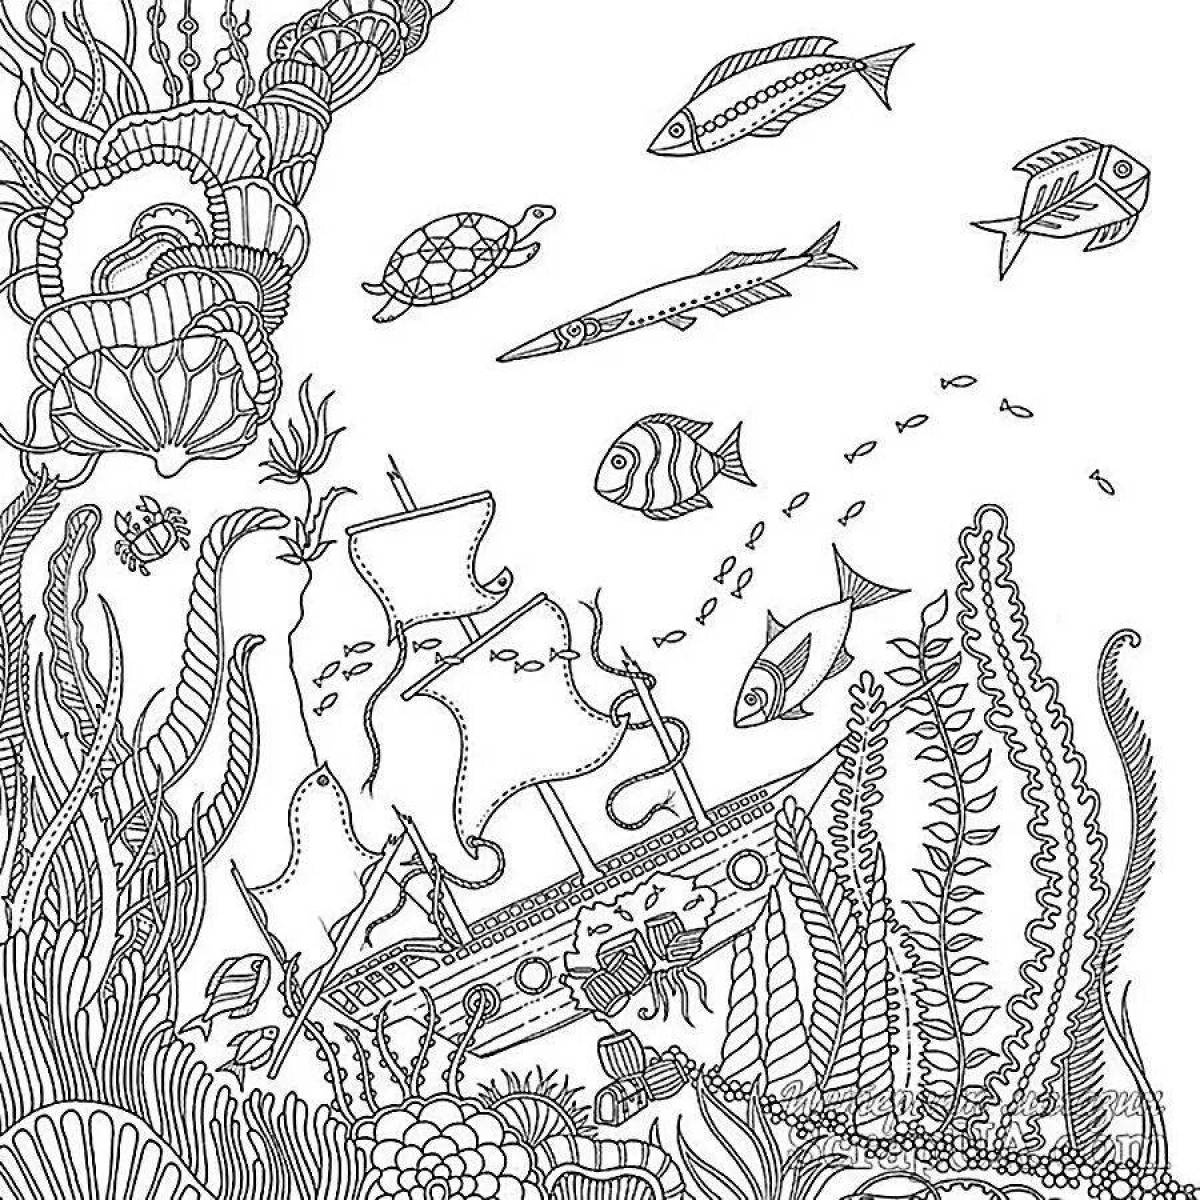 Coloring page dazzling sunken ship